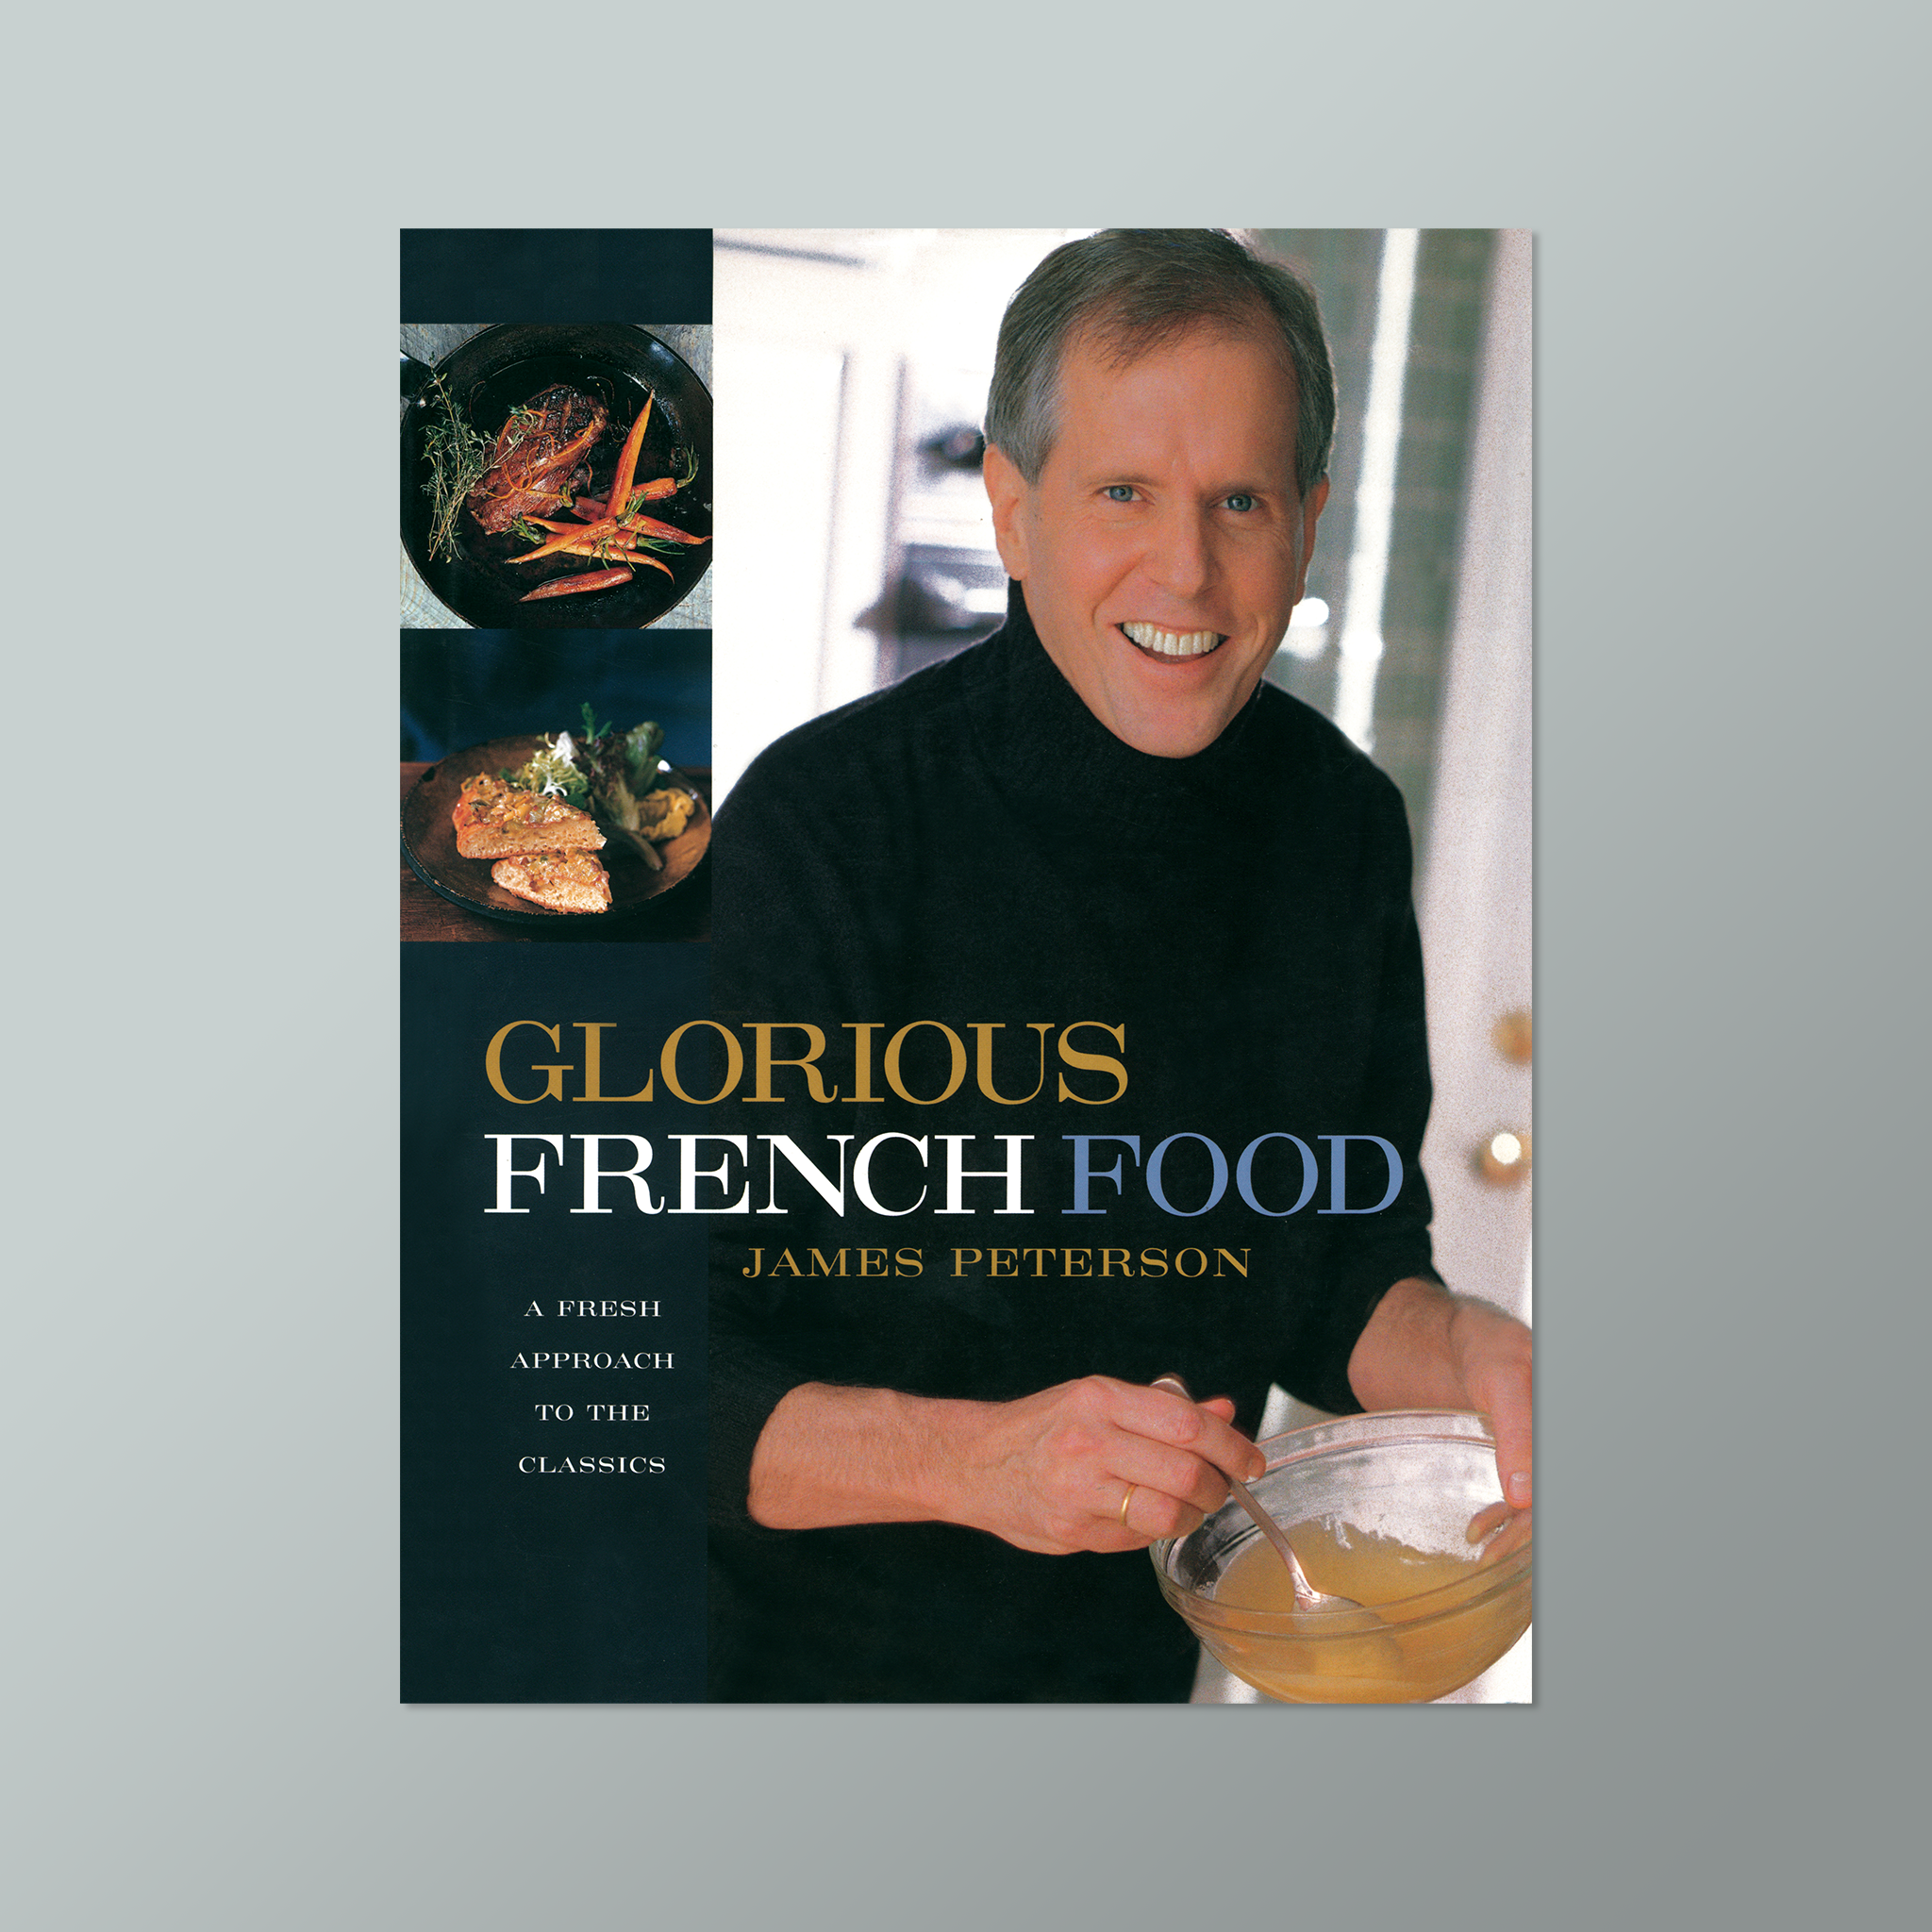 Glorious French Food cookbook